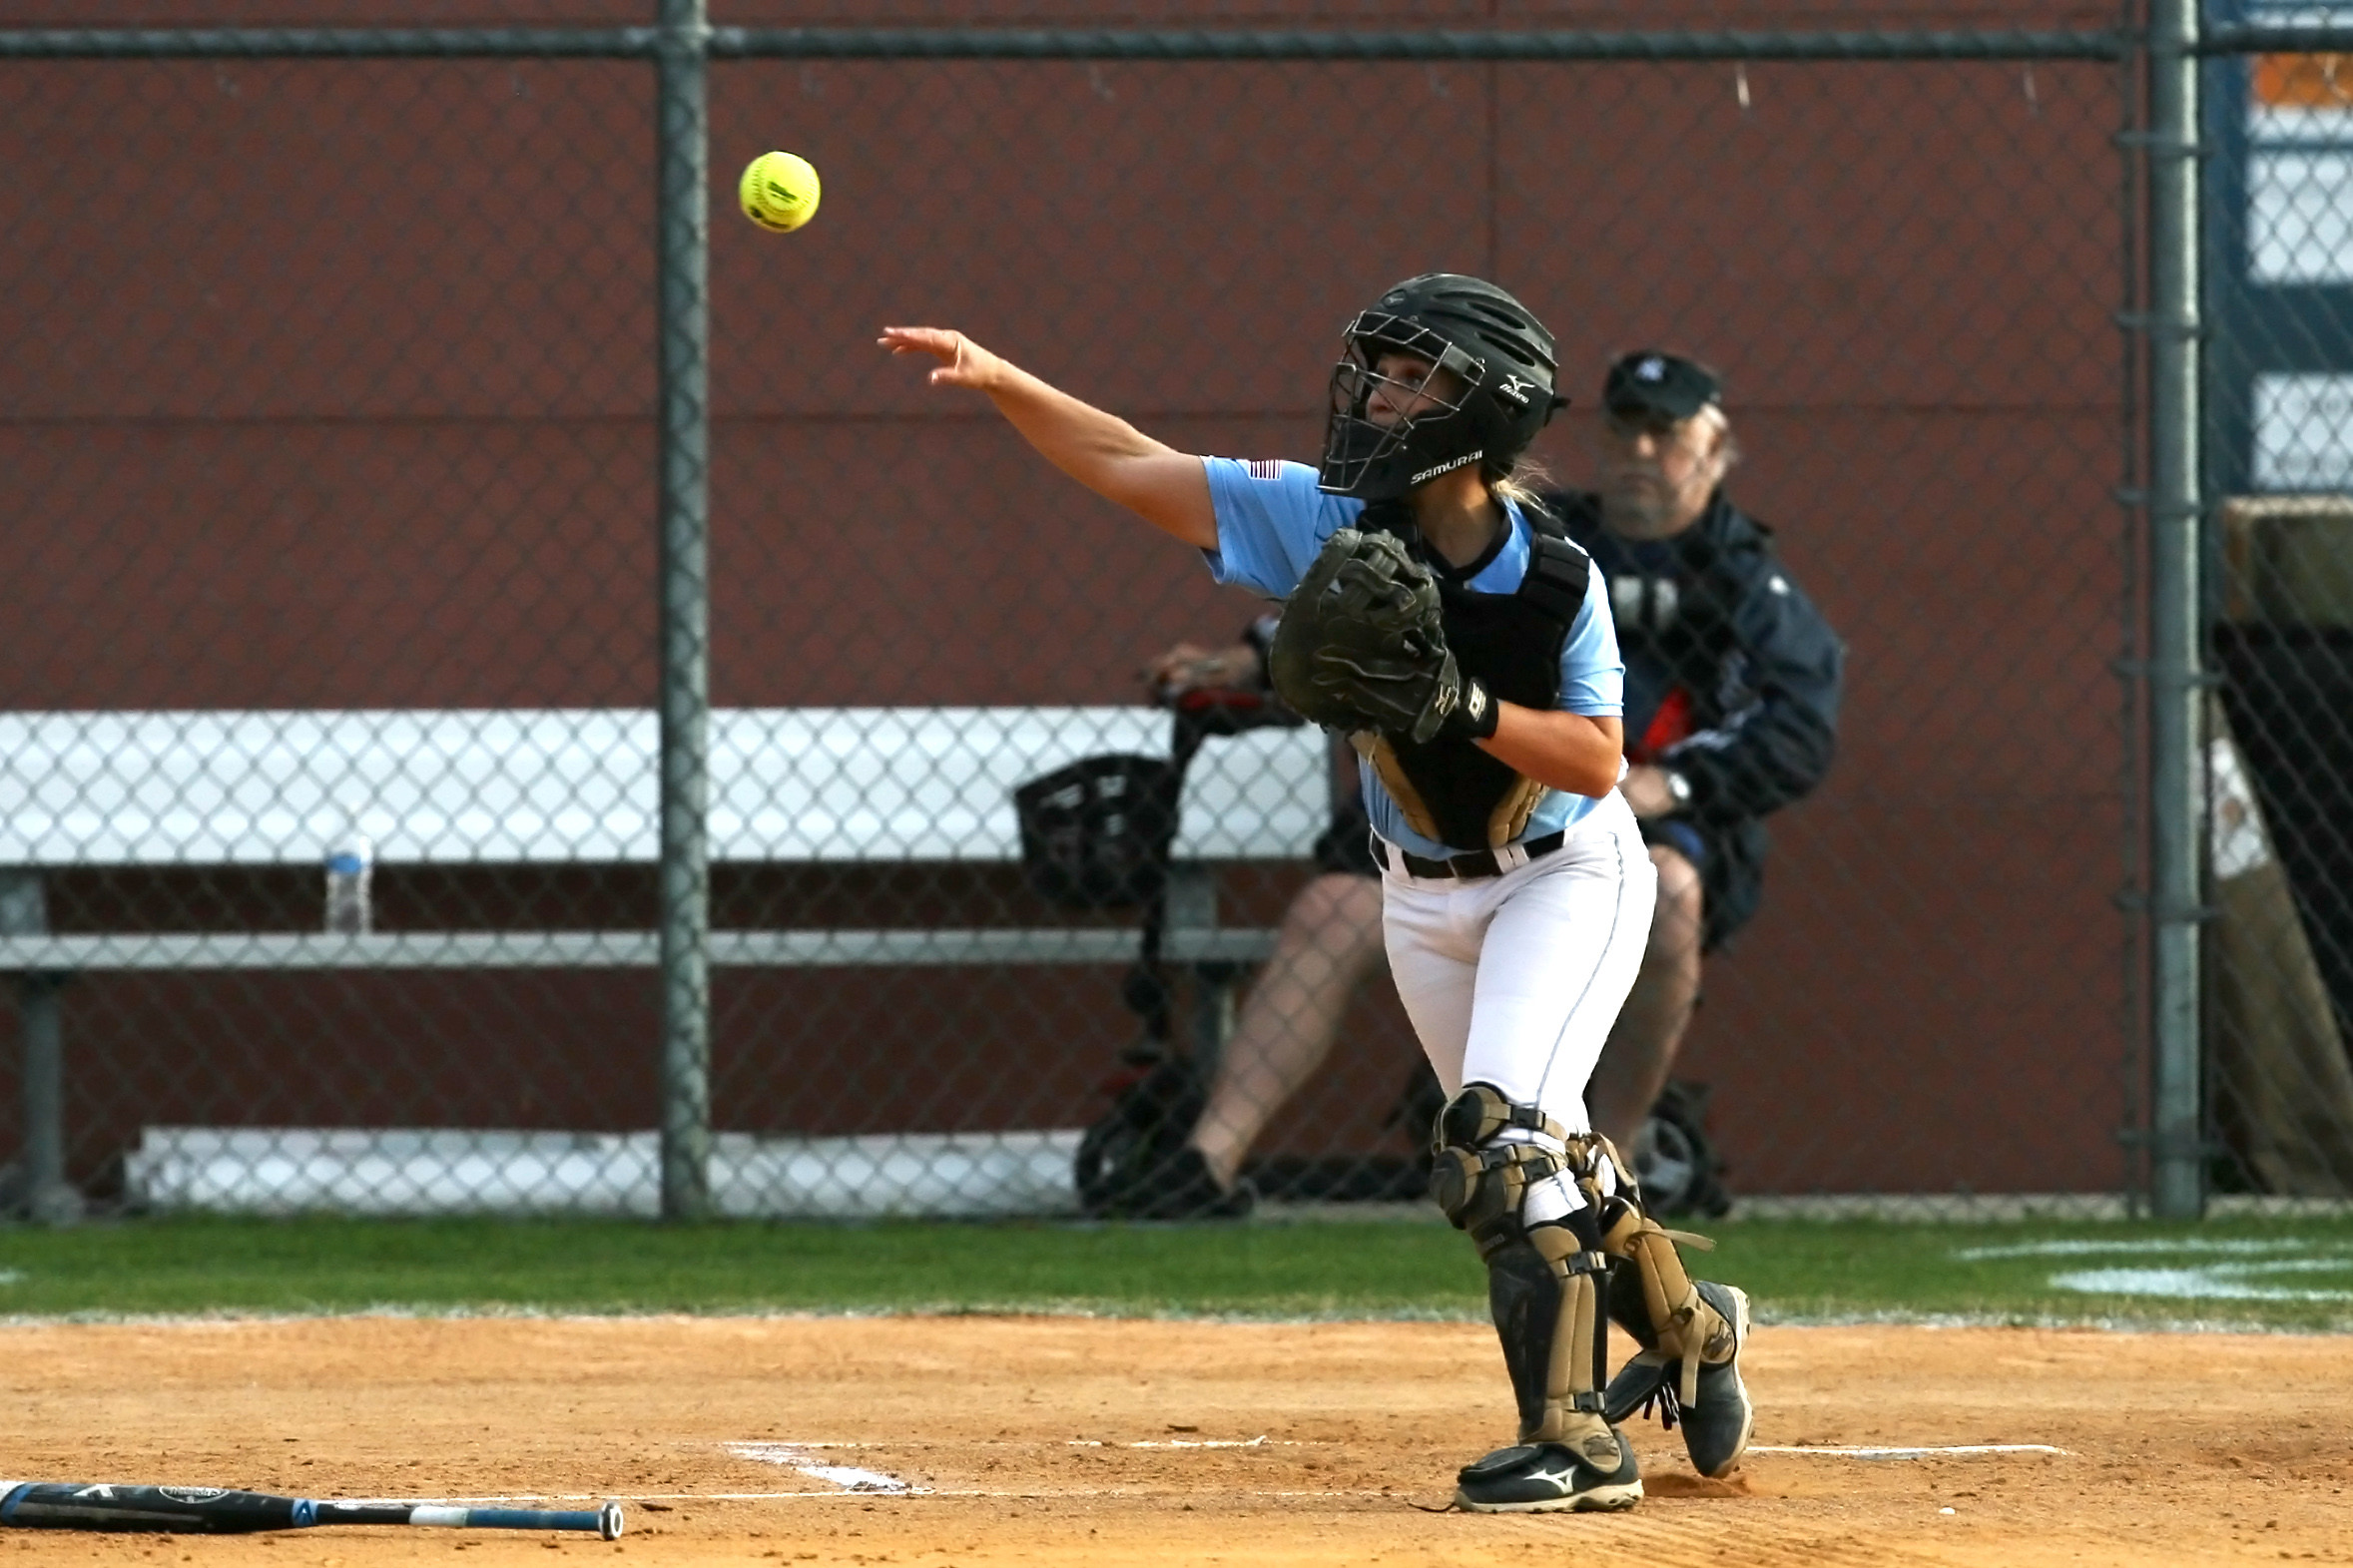 Catcher Taylor Bradshaw throws to first to get the Pedro batter attempting a bunt.